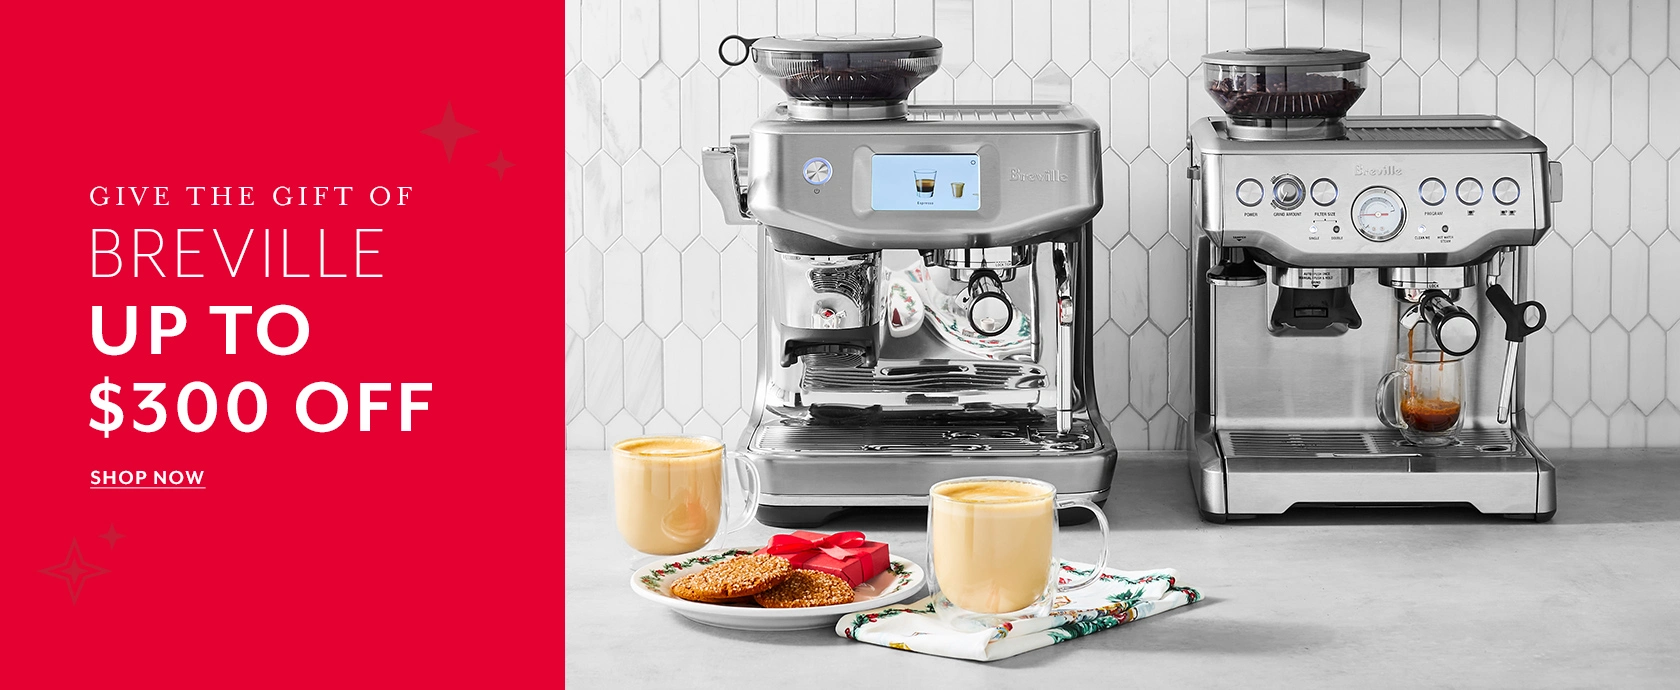 Give the gift of Breville up to $300 off, shop now.